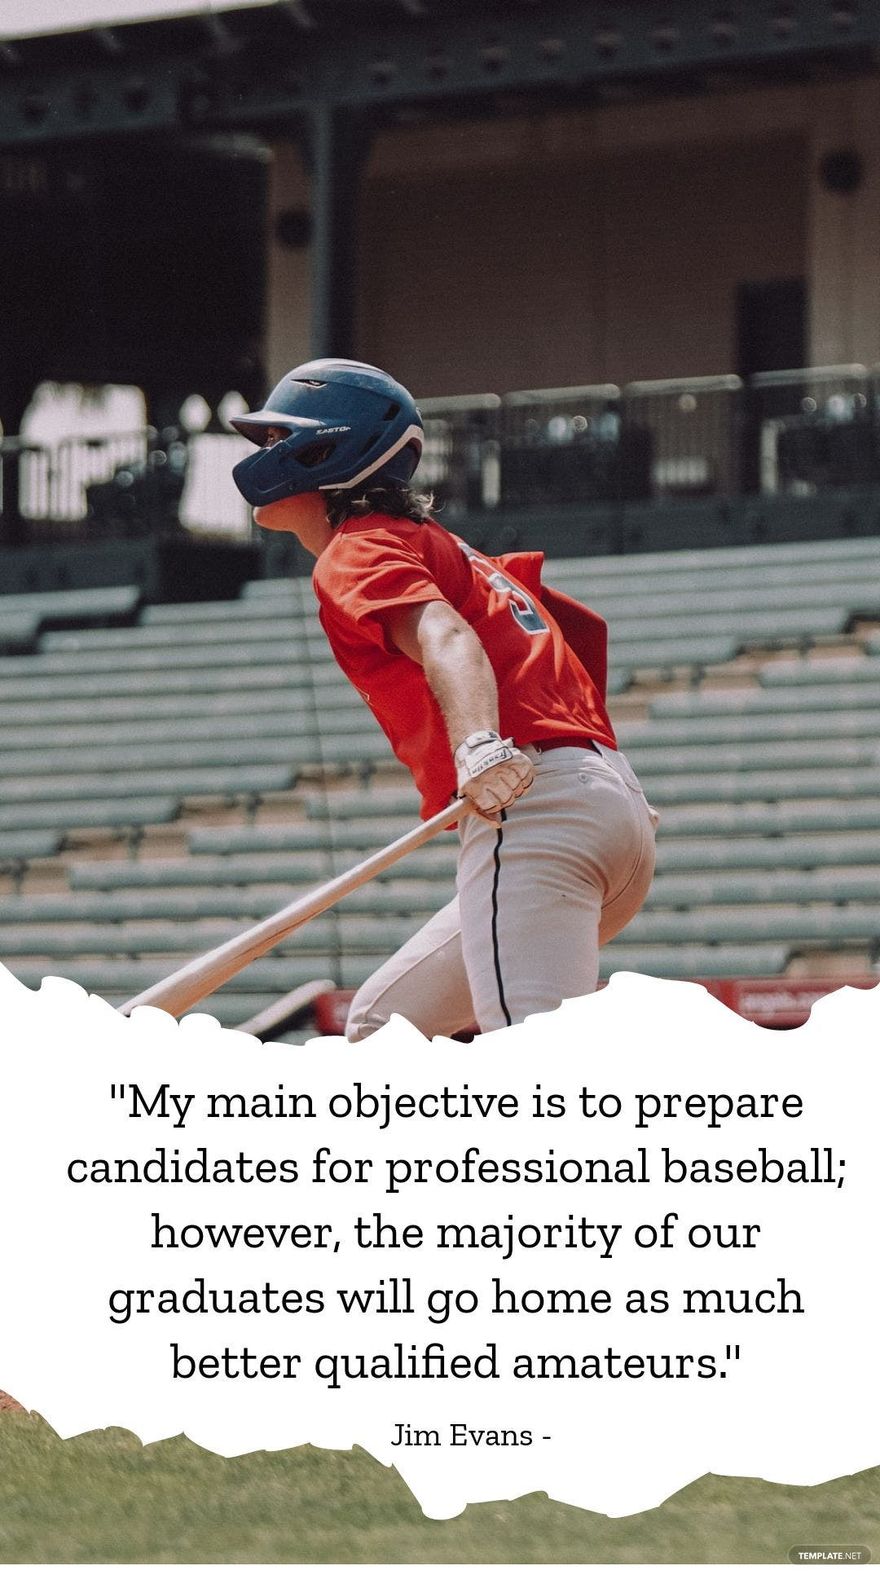 Jim Evans - My main objective is to prepare candidates for professional baseball; however, the majority of our graduates will go home as much better qualified amateurs. in JPG